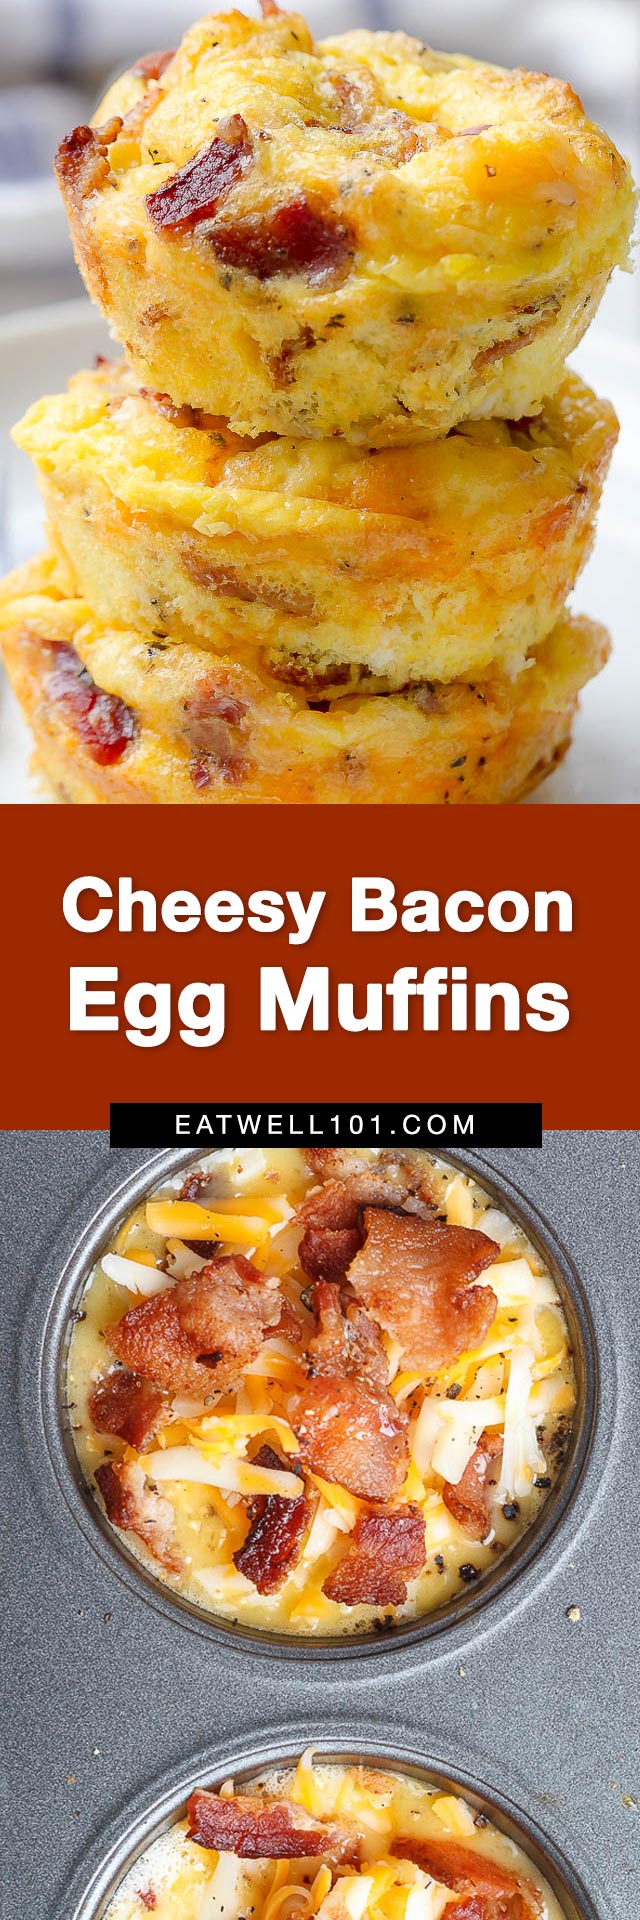 Cheesy Bacon Egg Muffins - #eggmuffins #keto #eatwell101 #recipe - Low in carbs and high in protein - The perfect make-ahead breakfast for on the go.